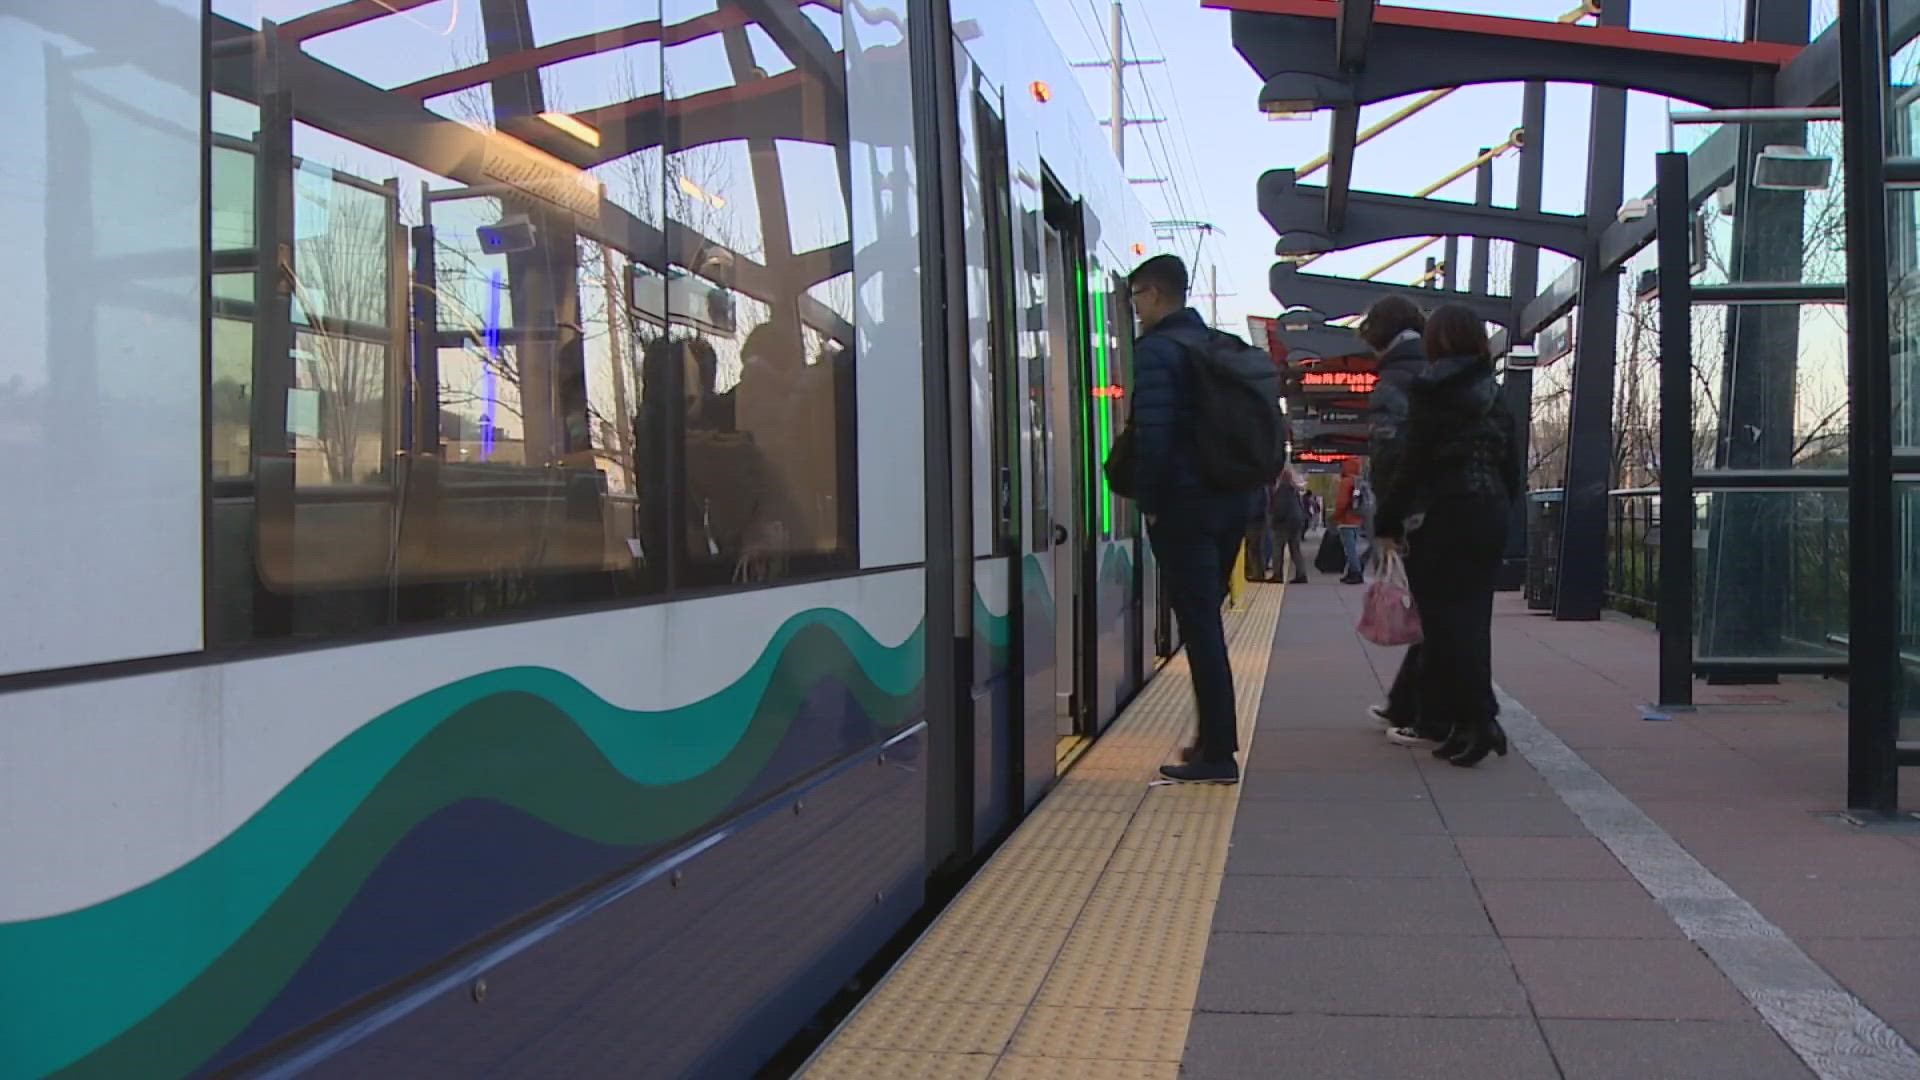 To increase overall safety and security, Sound Transit and King County Metro are hiring more security personnel.